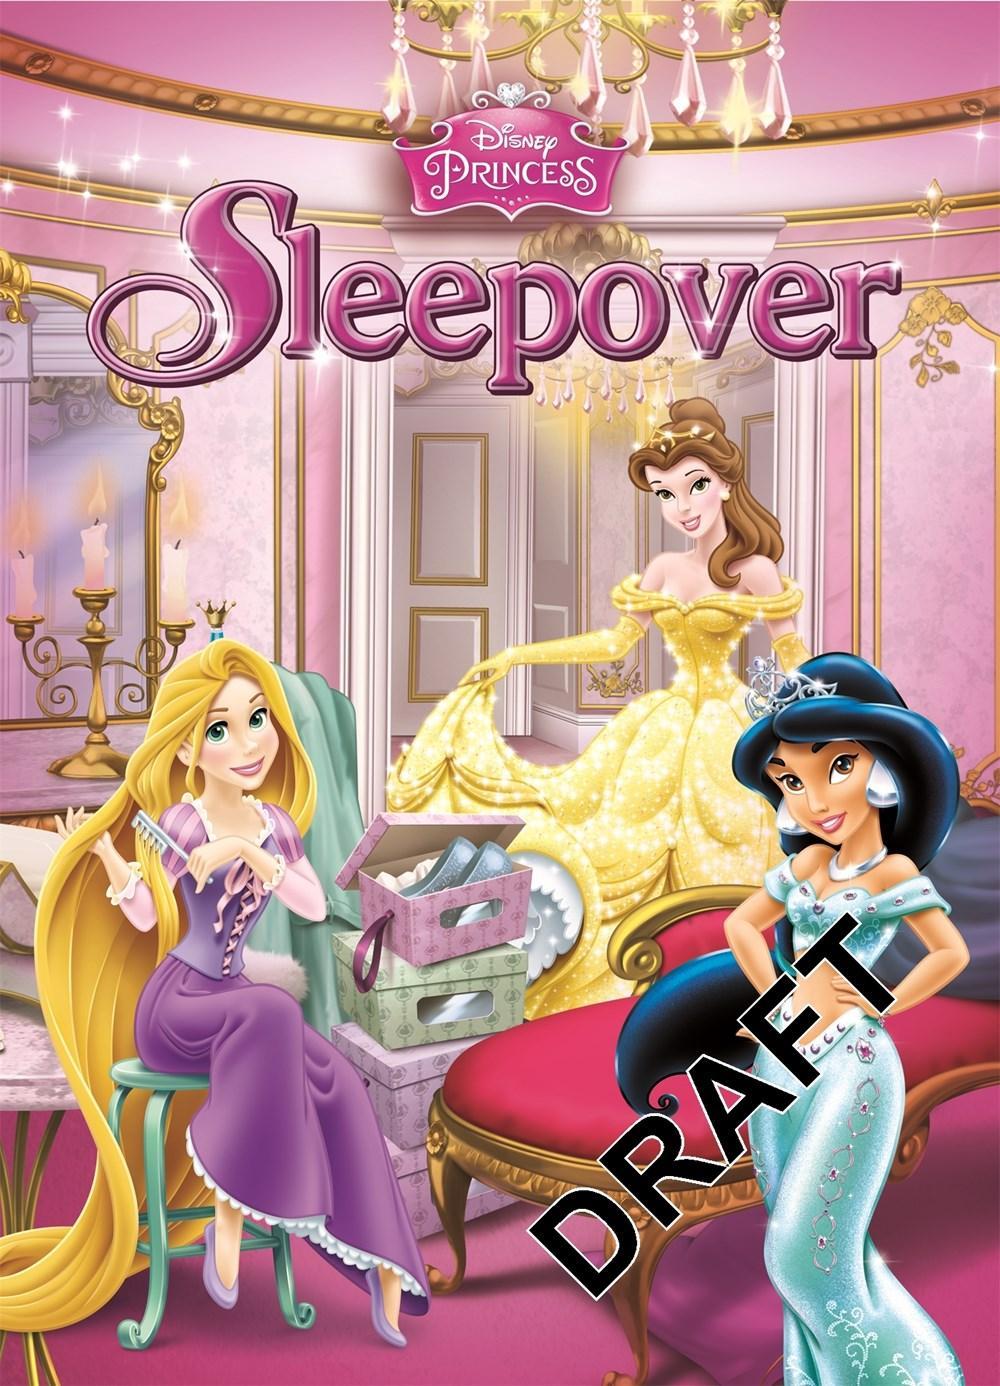 EDDA USA JUNE 2017 Disney Princess Sleepover & Other Parties Plan an unforgettable sleepover party with the help of all of the Disney Princesses.